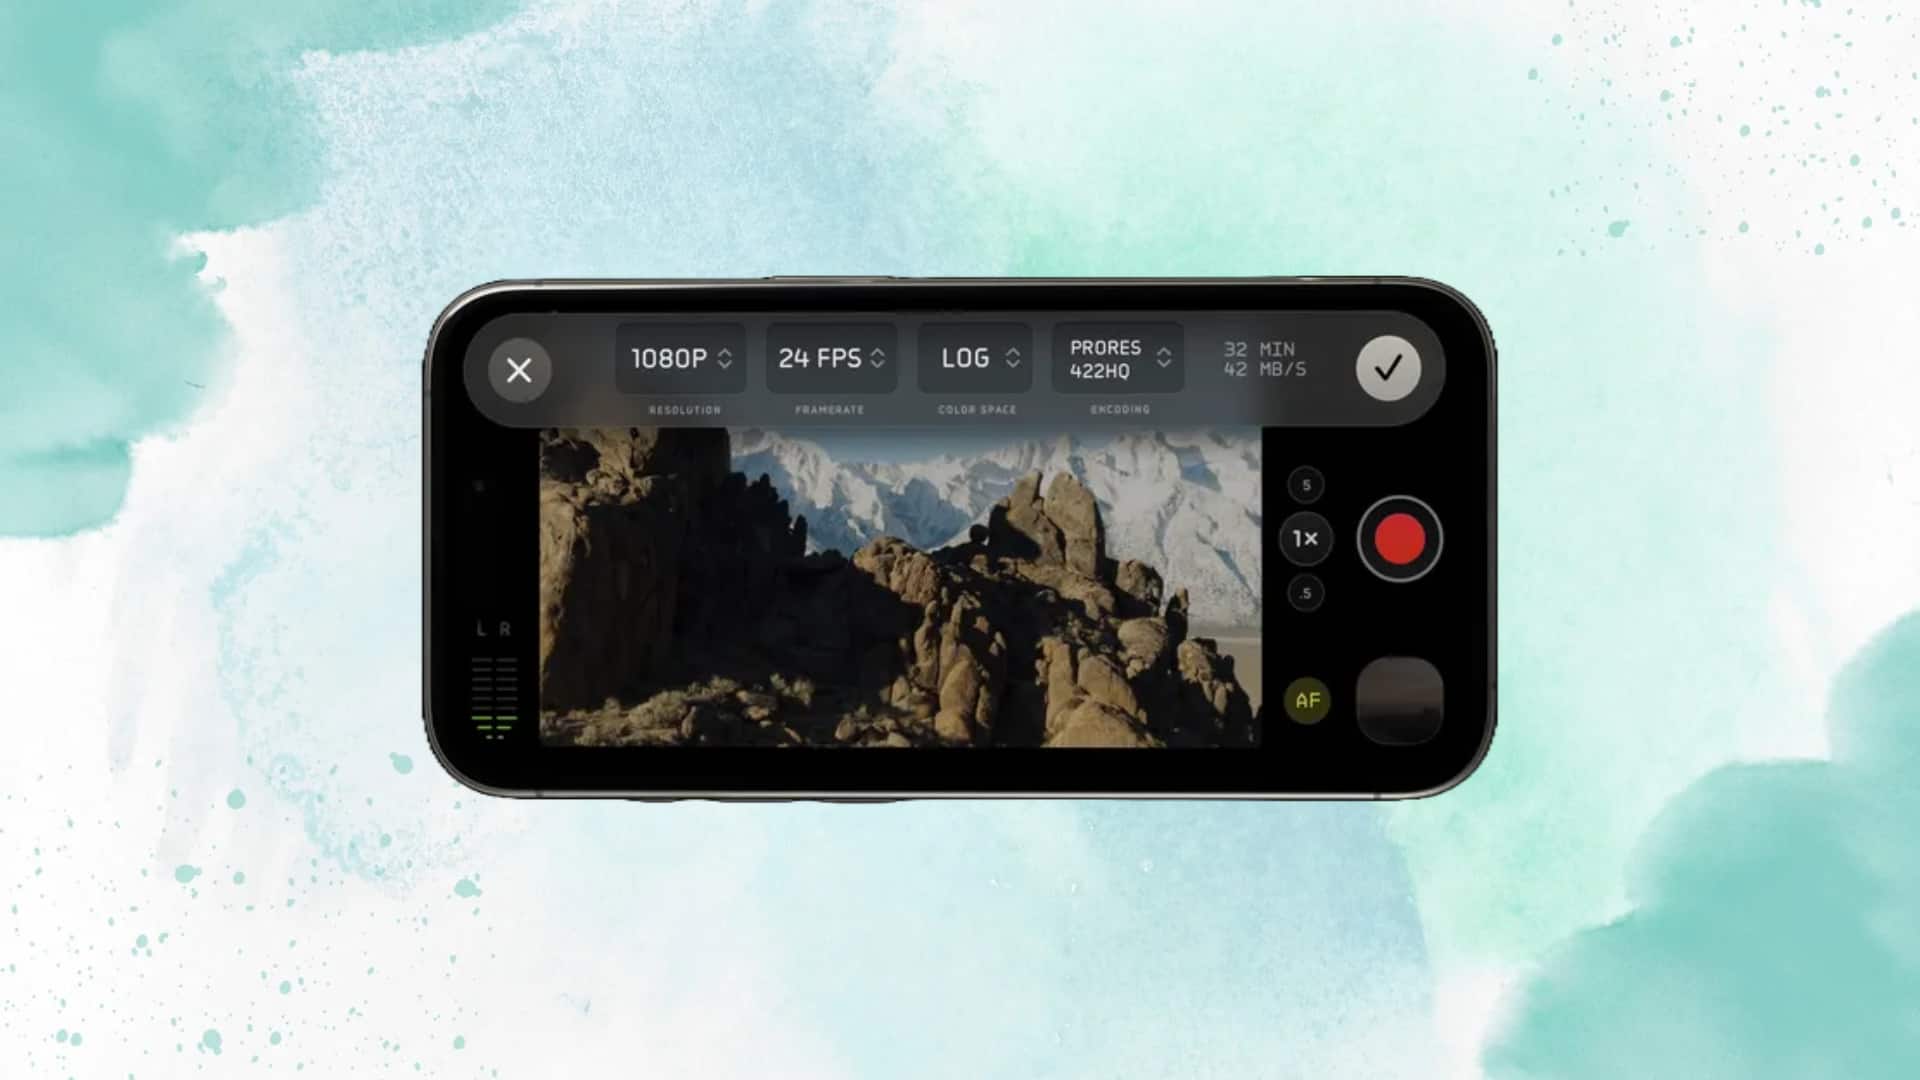 New Kino app brings professional videography controls to your iPhone